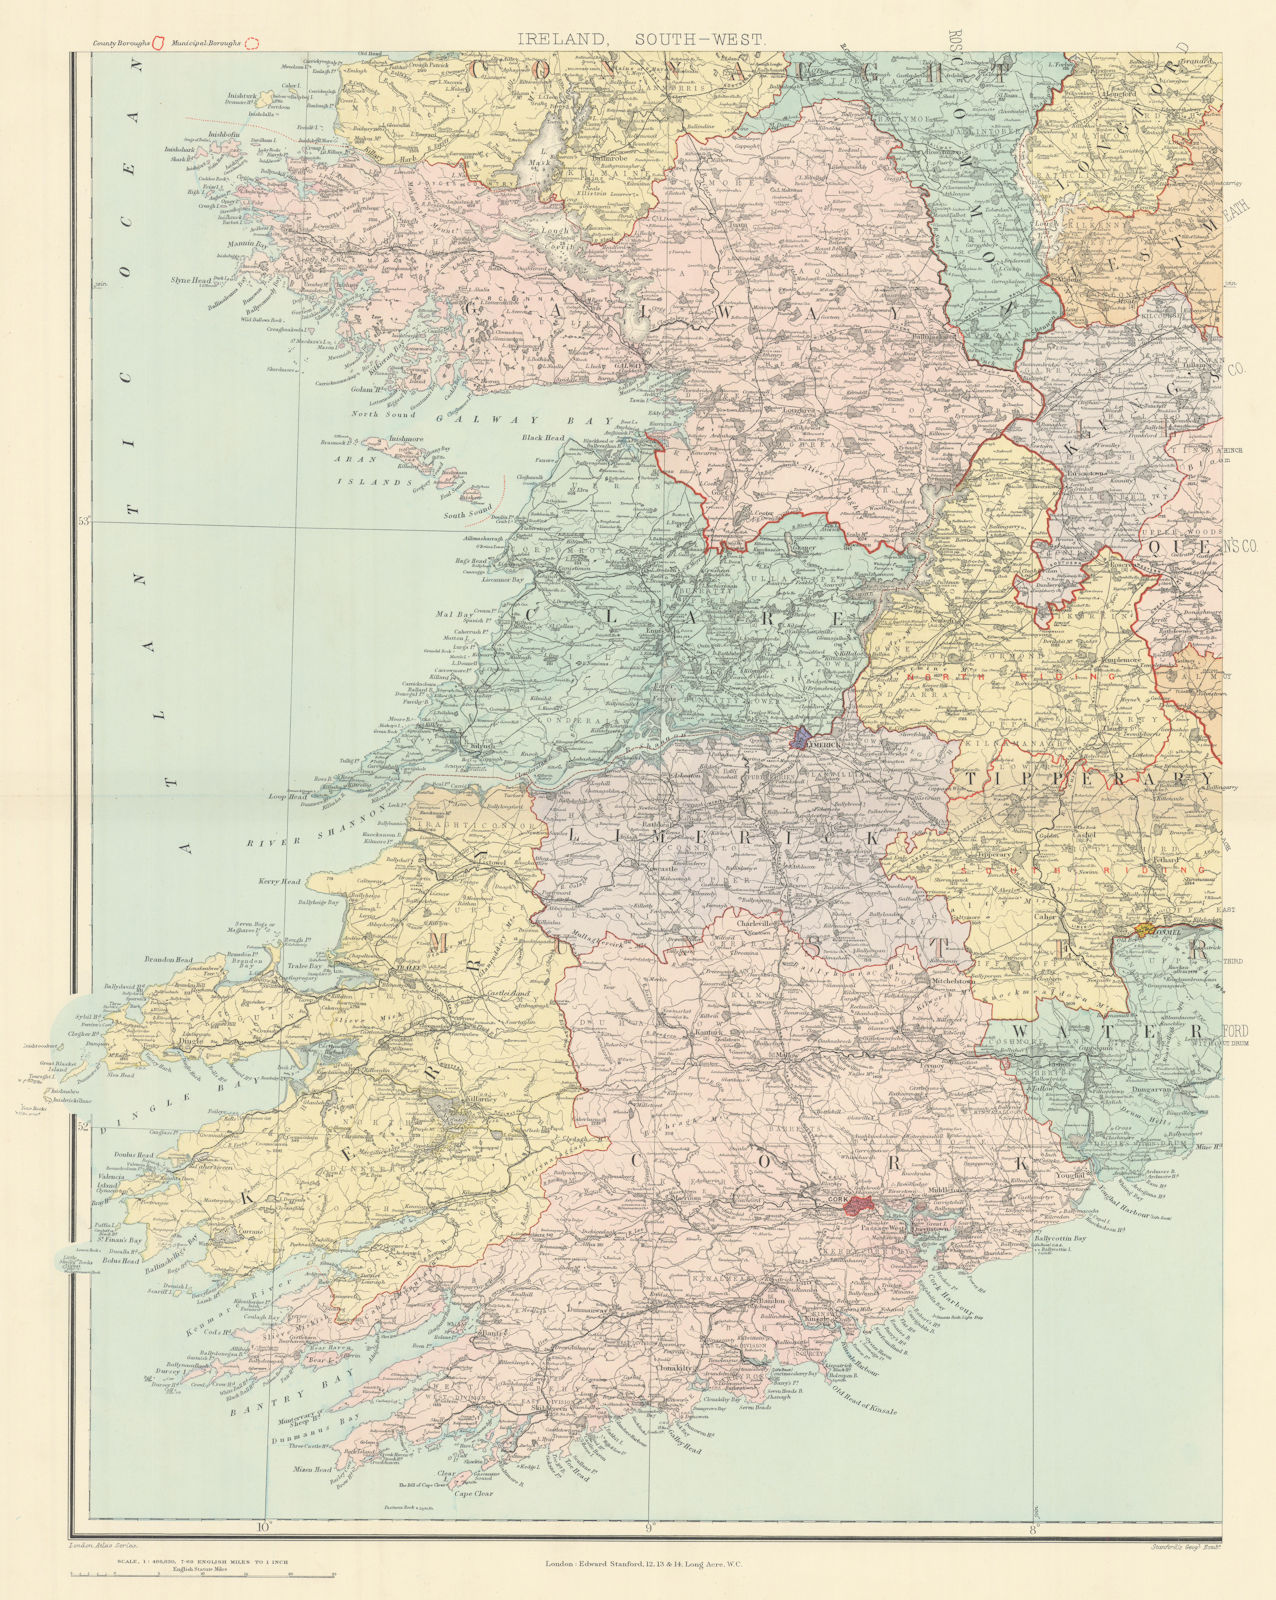 Ireland south-west Munster Kerry Limerick Cork Clare Limerick. STANFORD 1904 map